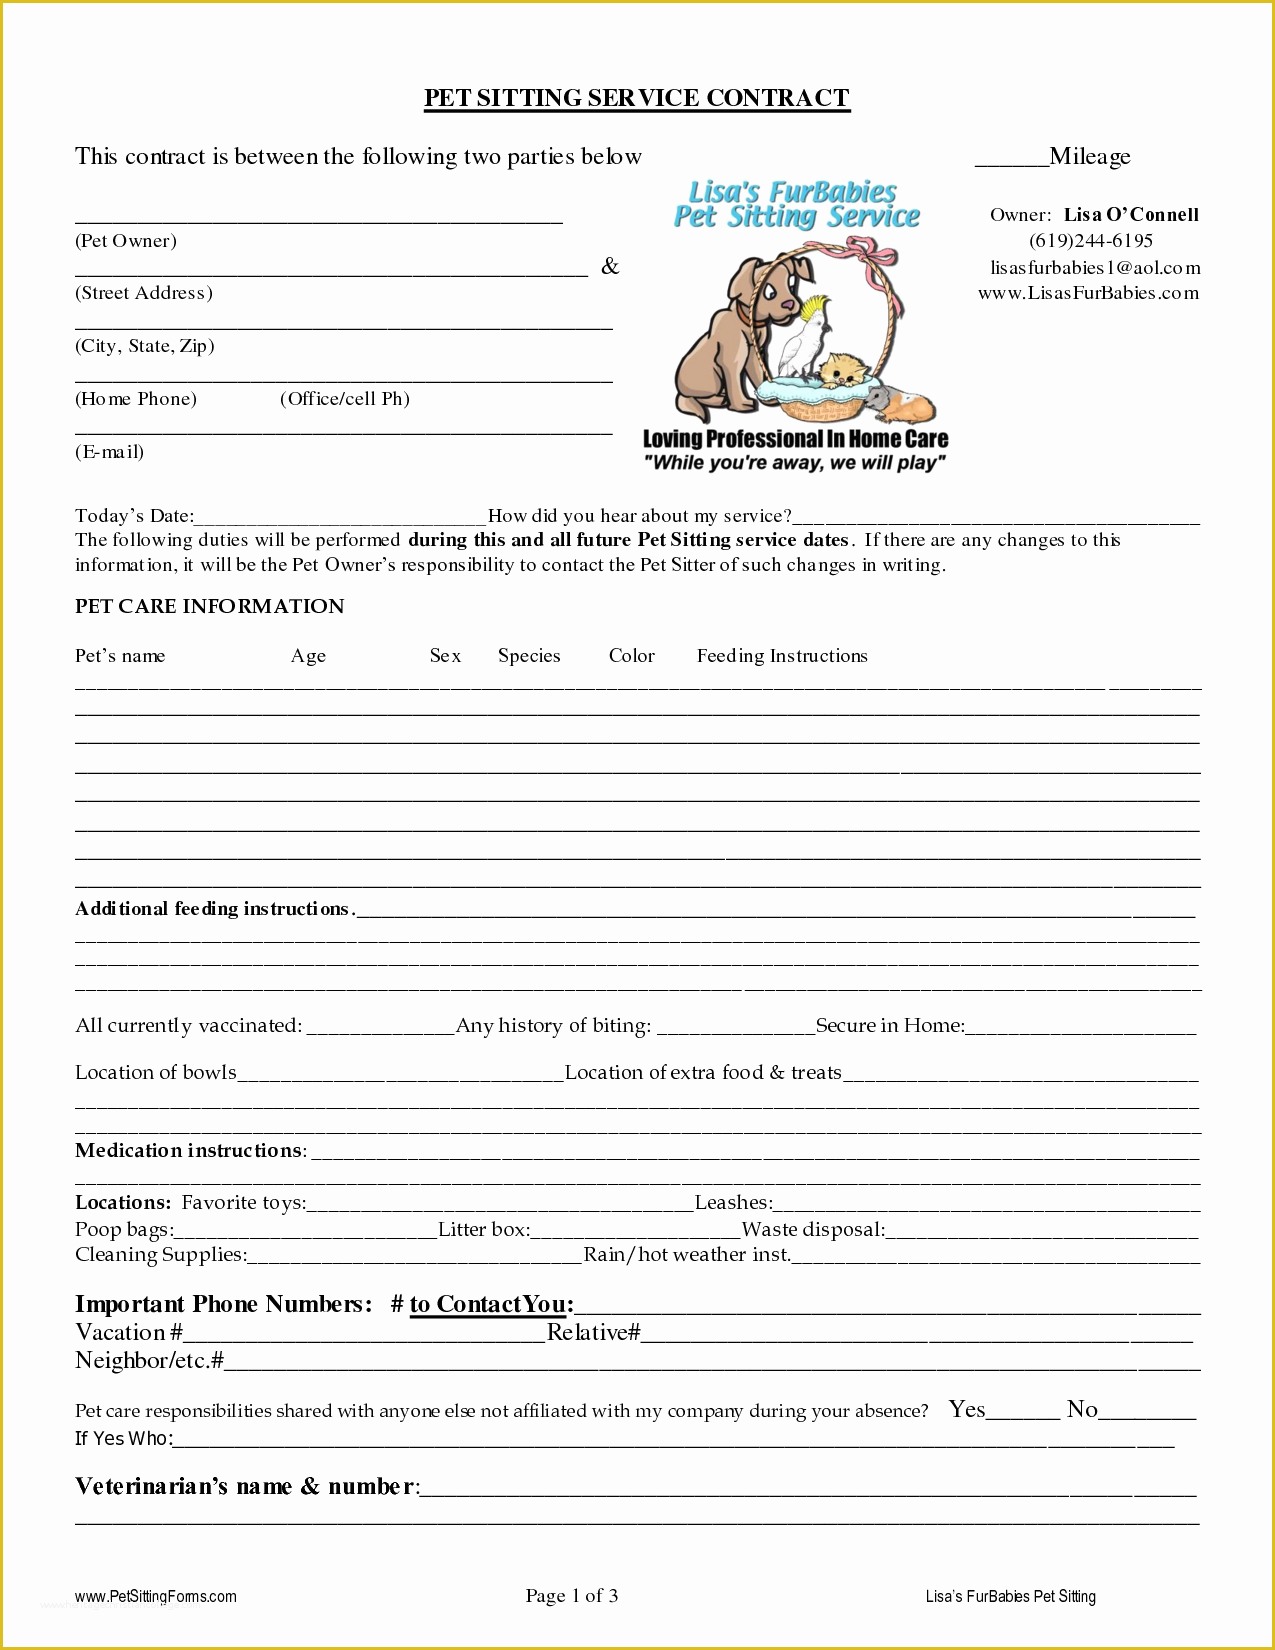 Free Dog Training Contract Template Of Pet Sitting Contract Templates Dogs Pinterest